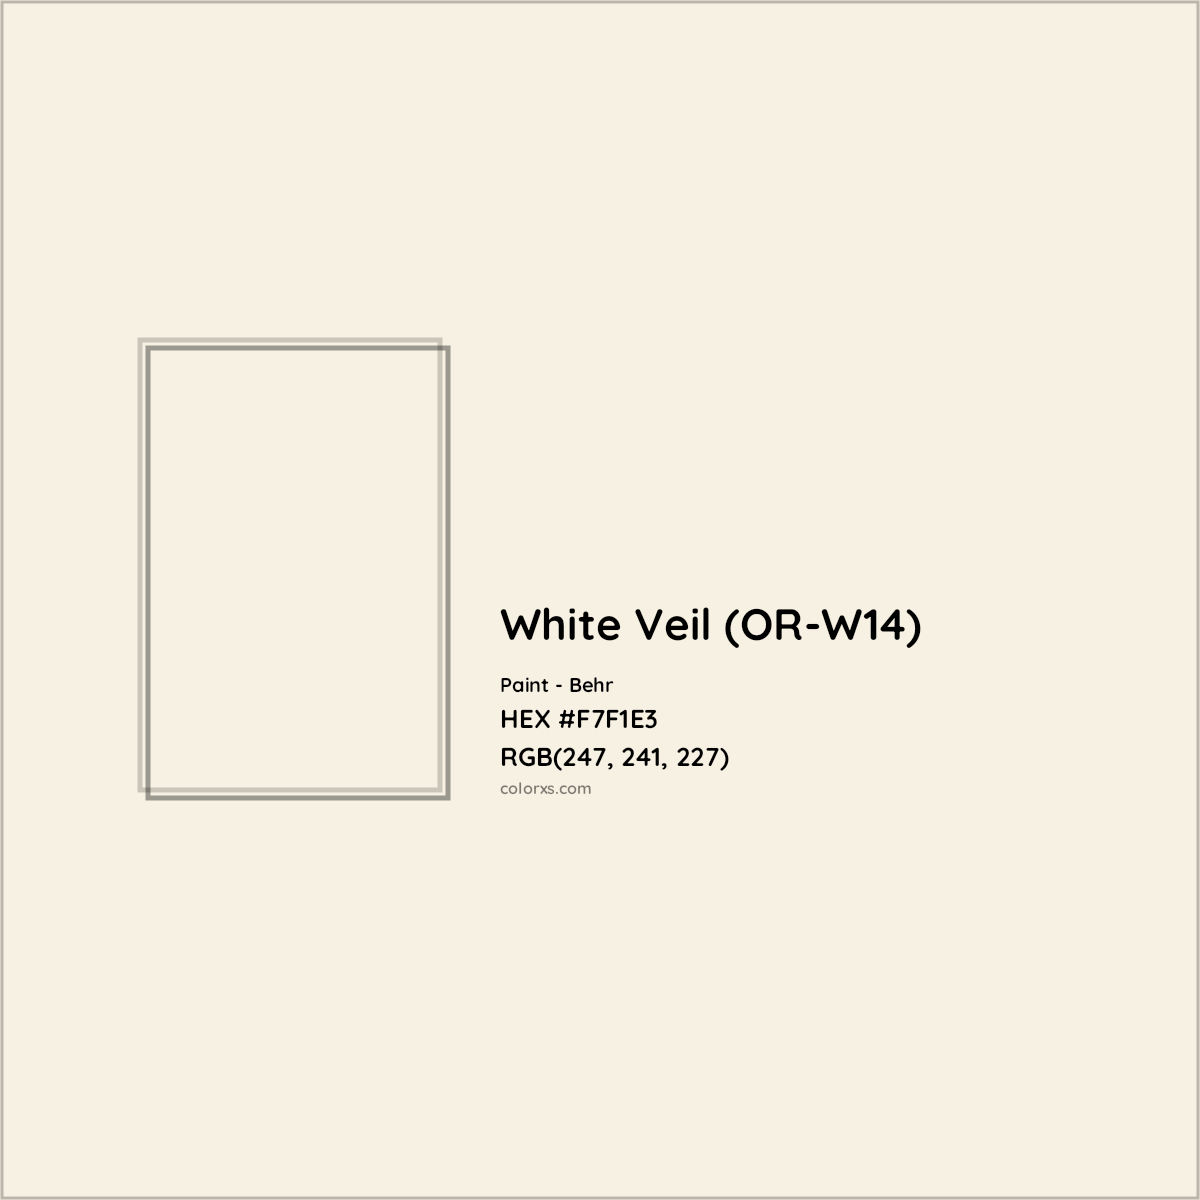 HEX #F7F1E3 White Veil (OR-W14) Paint Behr - Color Code